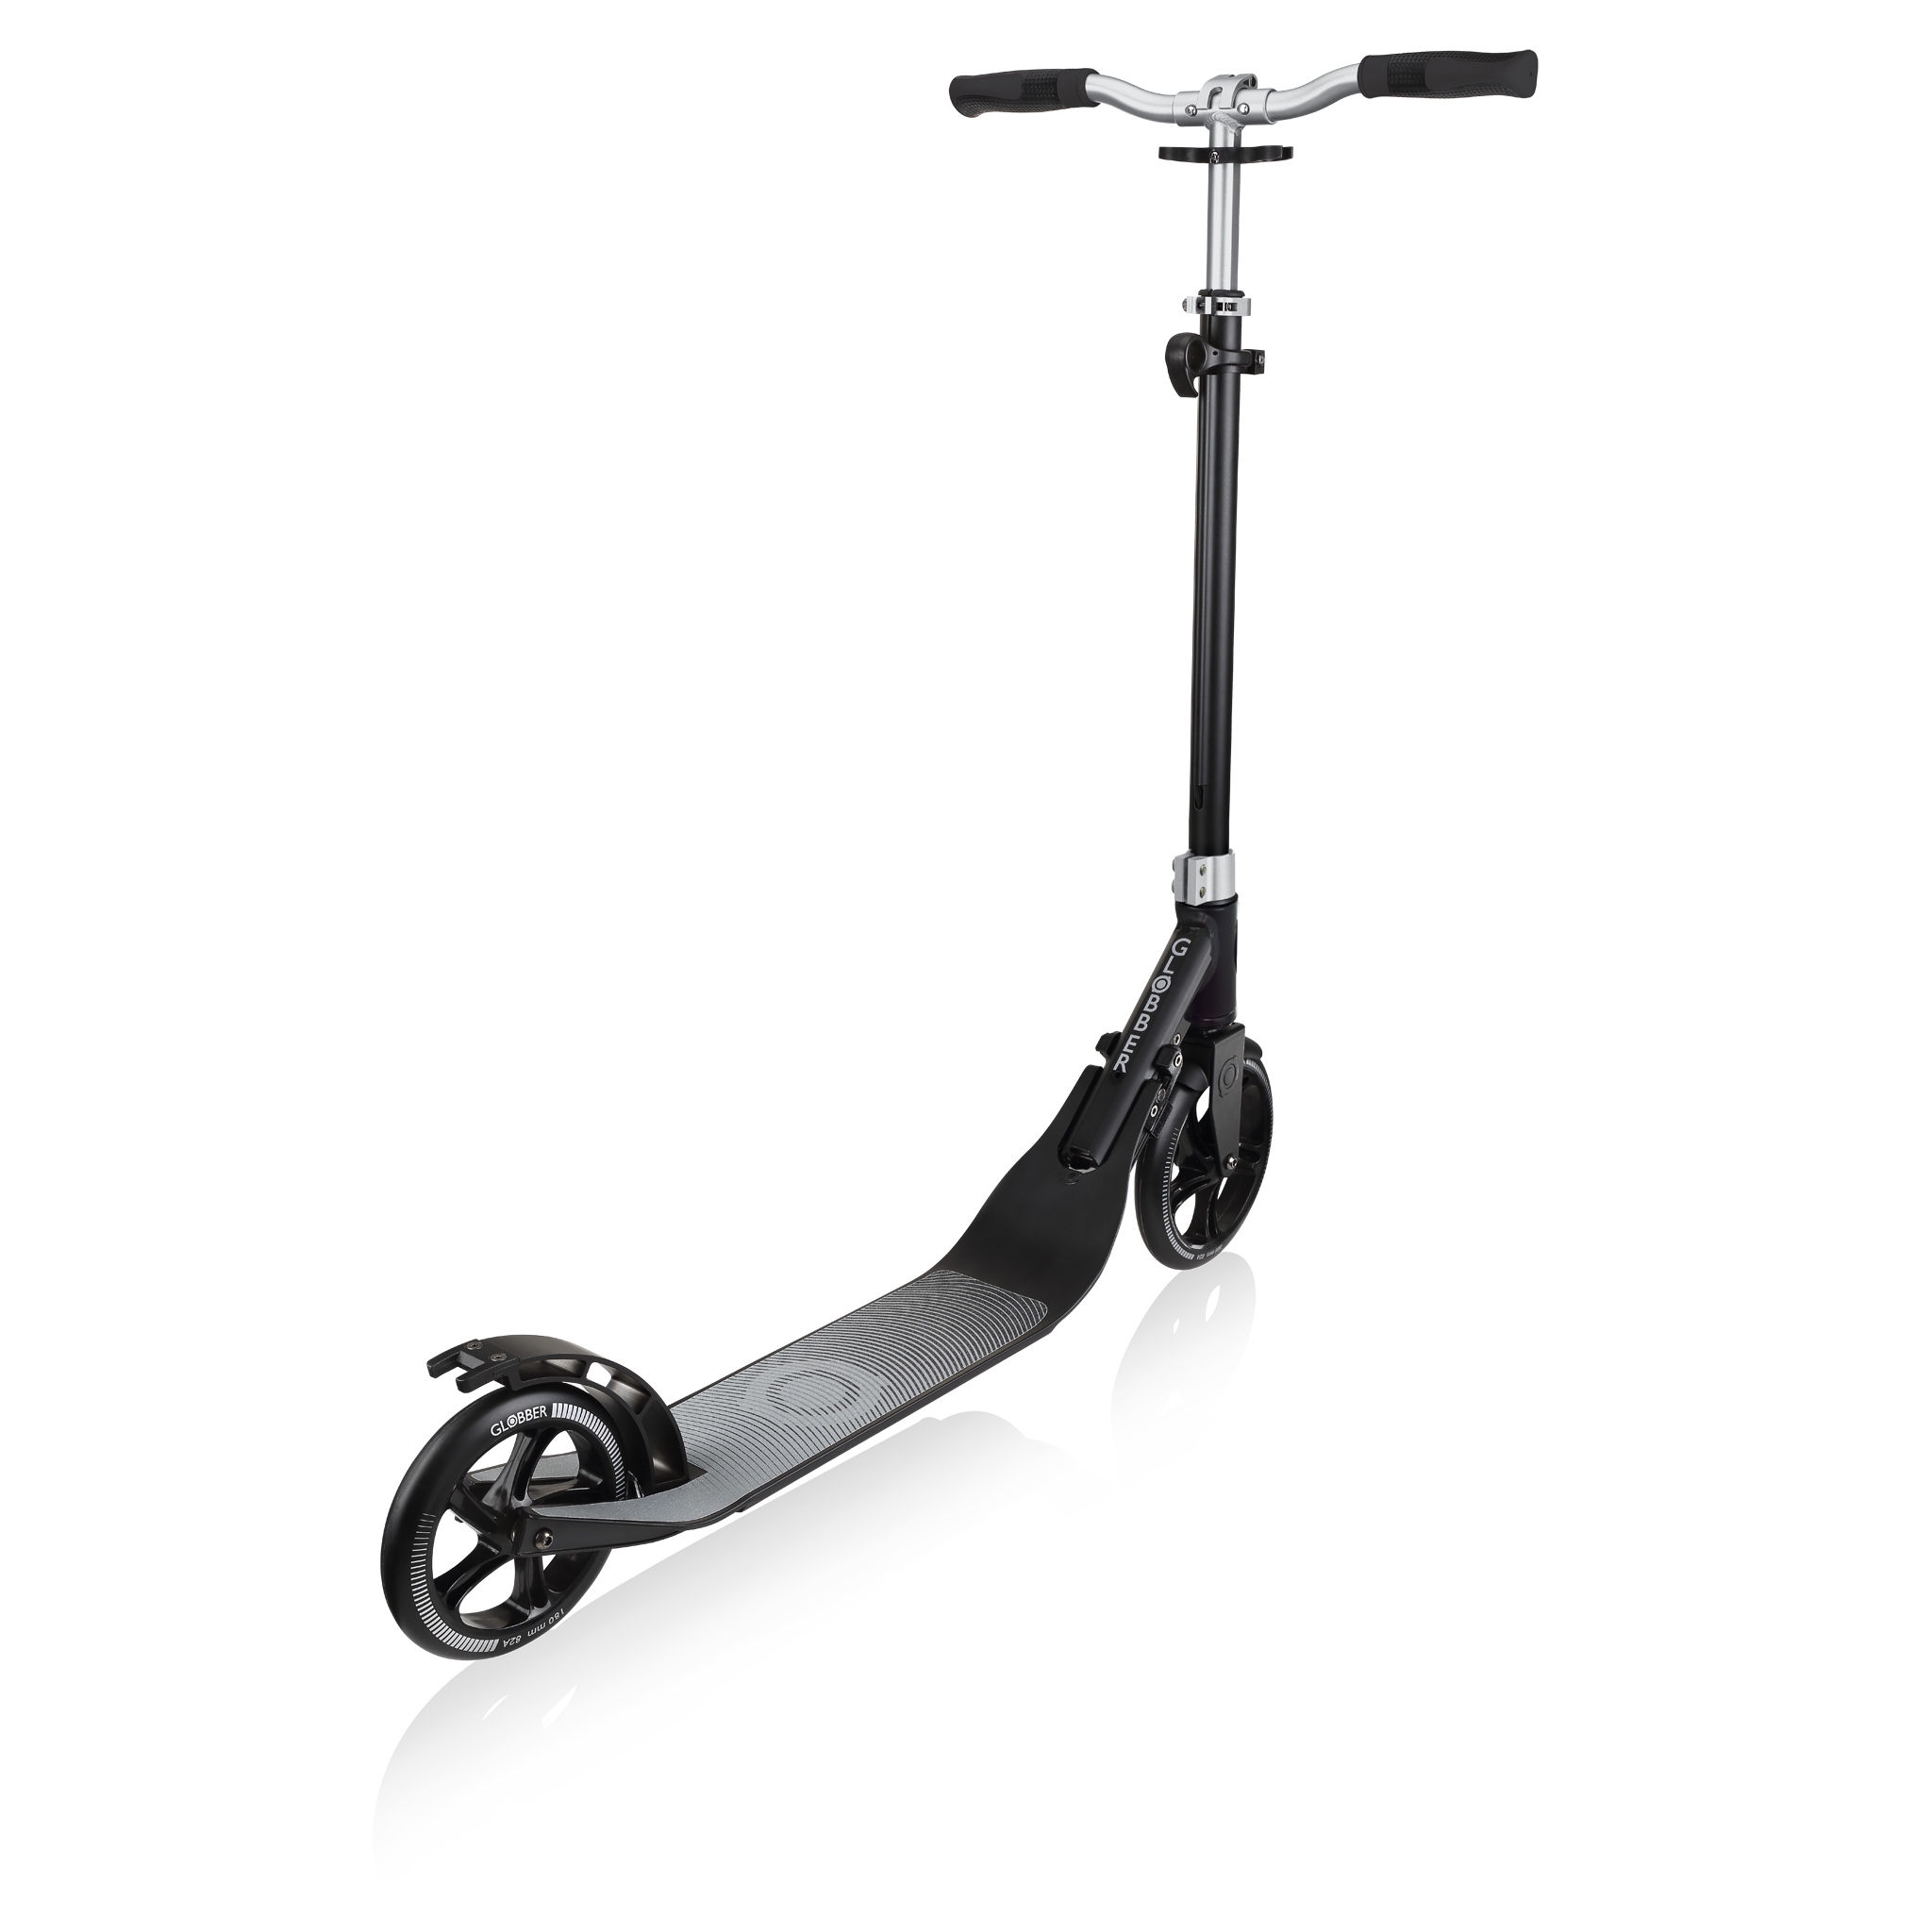 Globber-ONE-NL-205-180-DUO-2-wheel-foldable-scooter-for-adults-with-foldable-handlebar-lead-grey 5